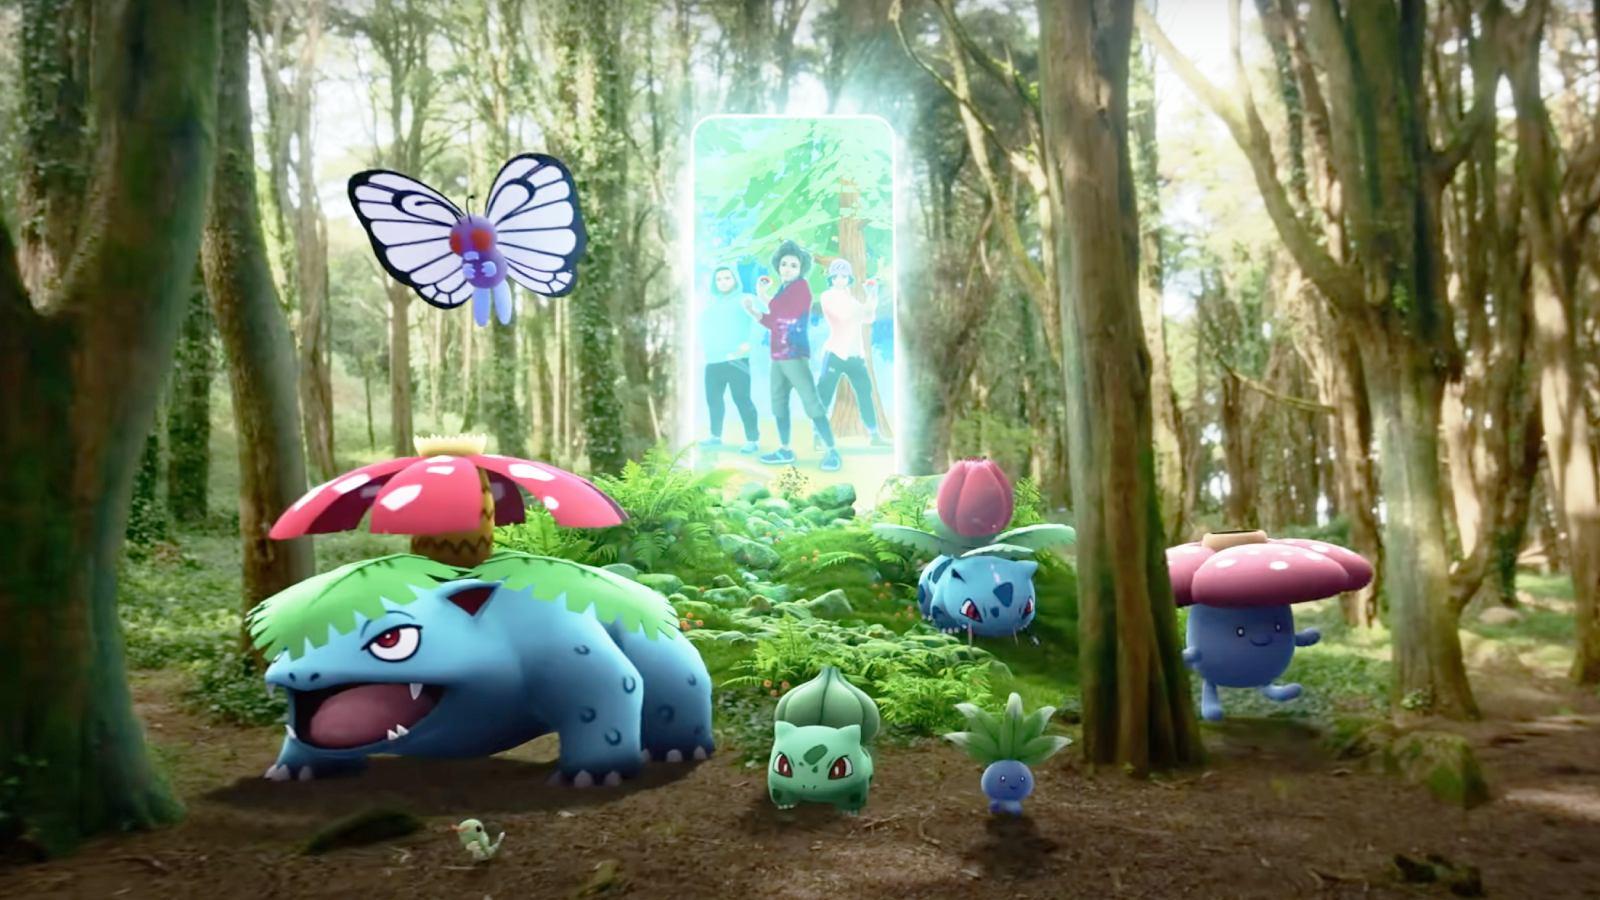 A screenshot from Pokemon Go trailer shows Venusaur, Butterfree, and others in the woods, while several Pokemon Go avatars appear to step through a door-shaped portal